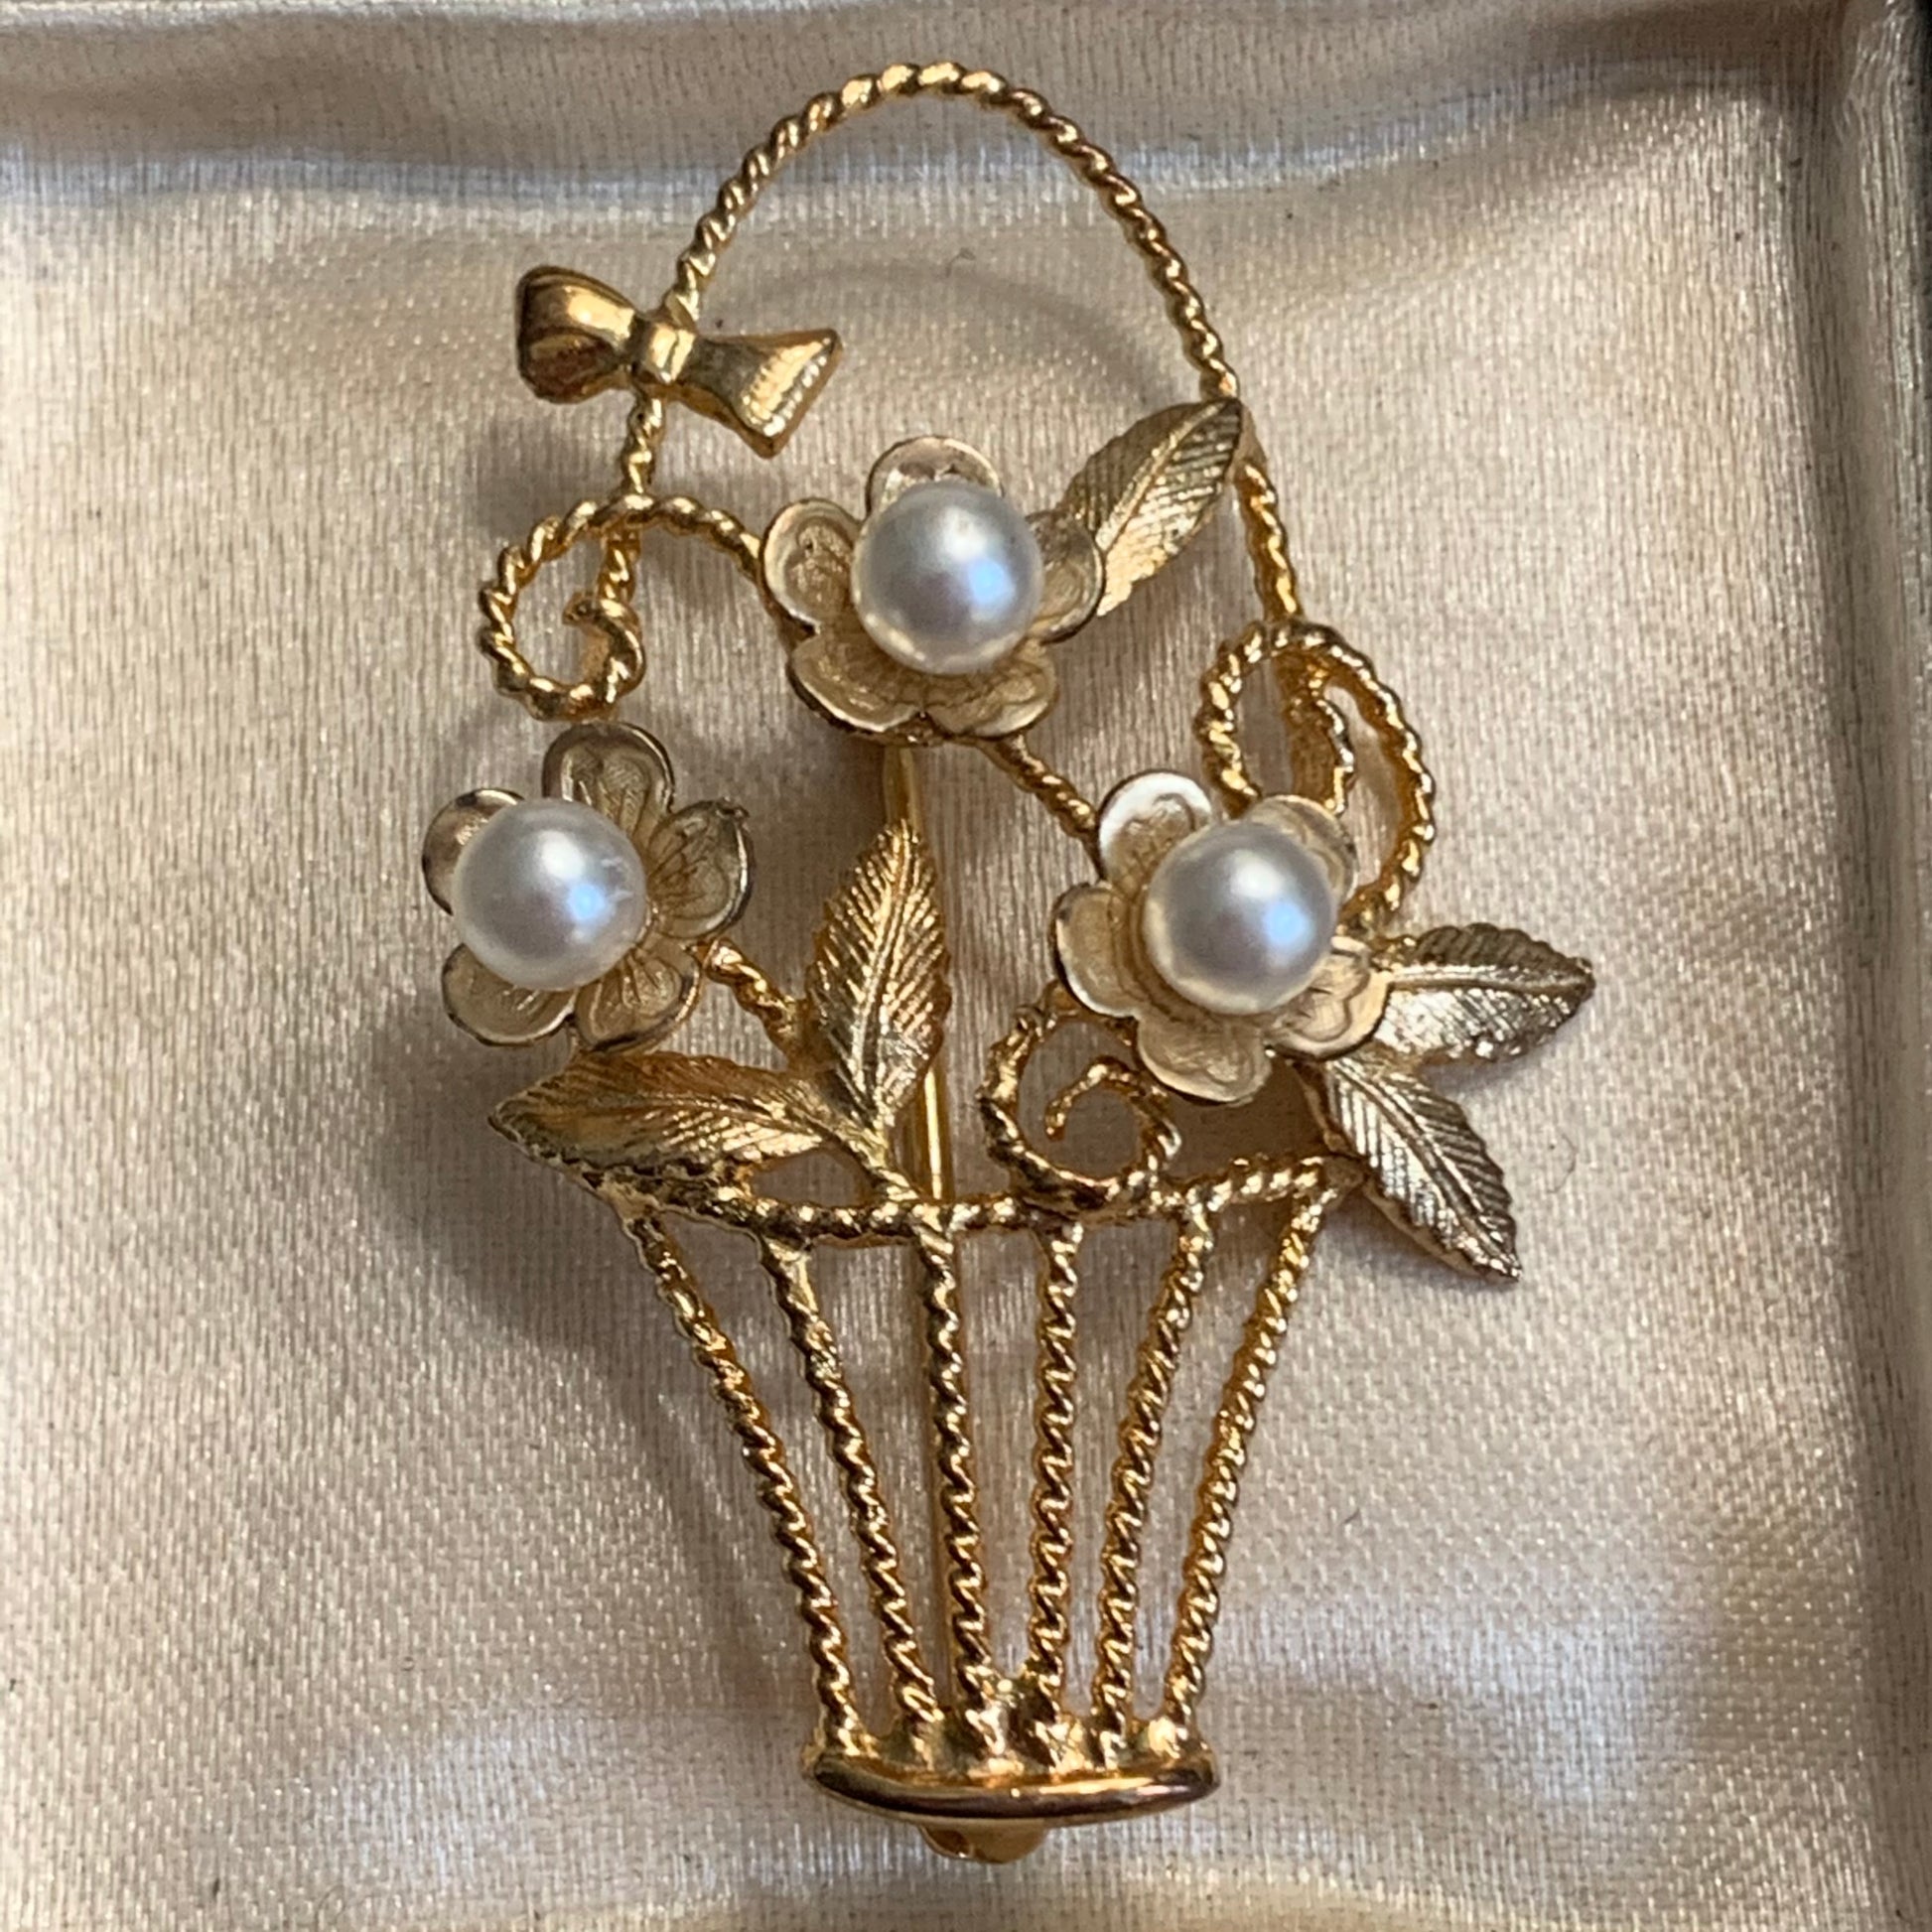 Creed Sterling Silver Gold Overlay Floral Faux Pearl Basket Pin